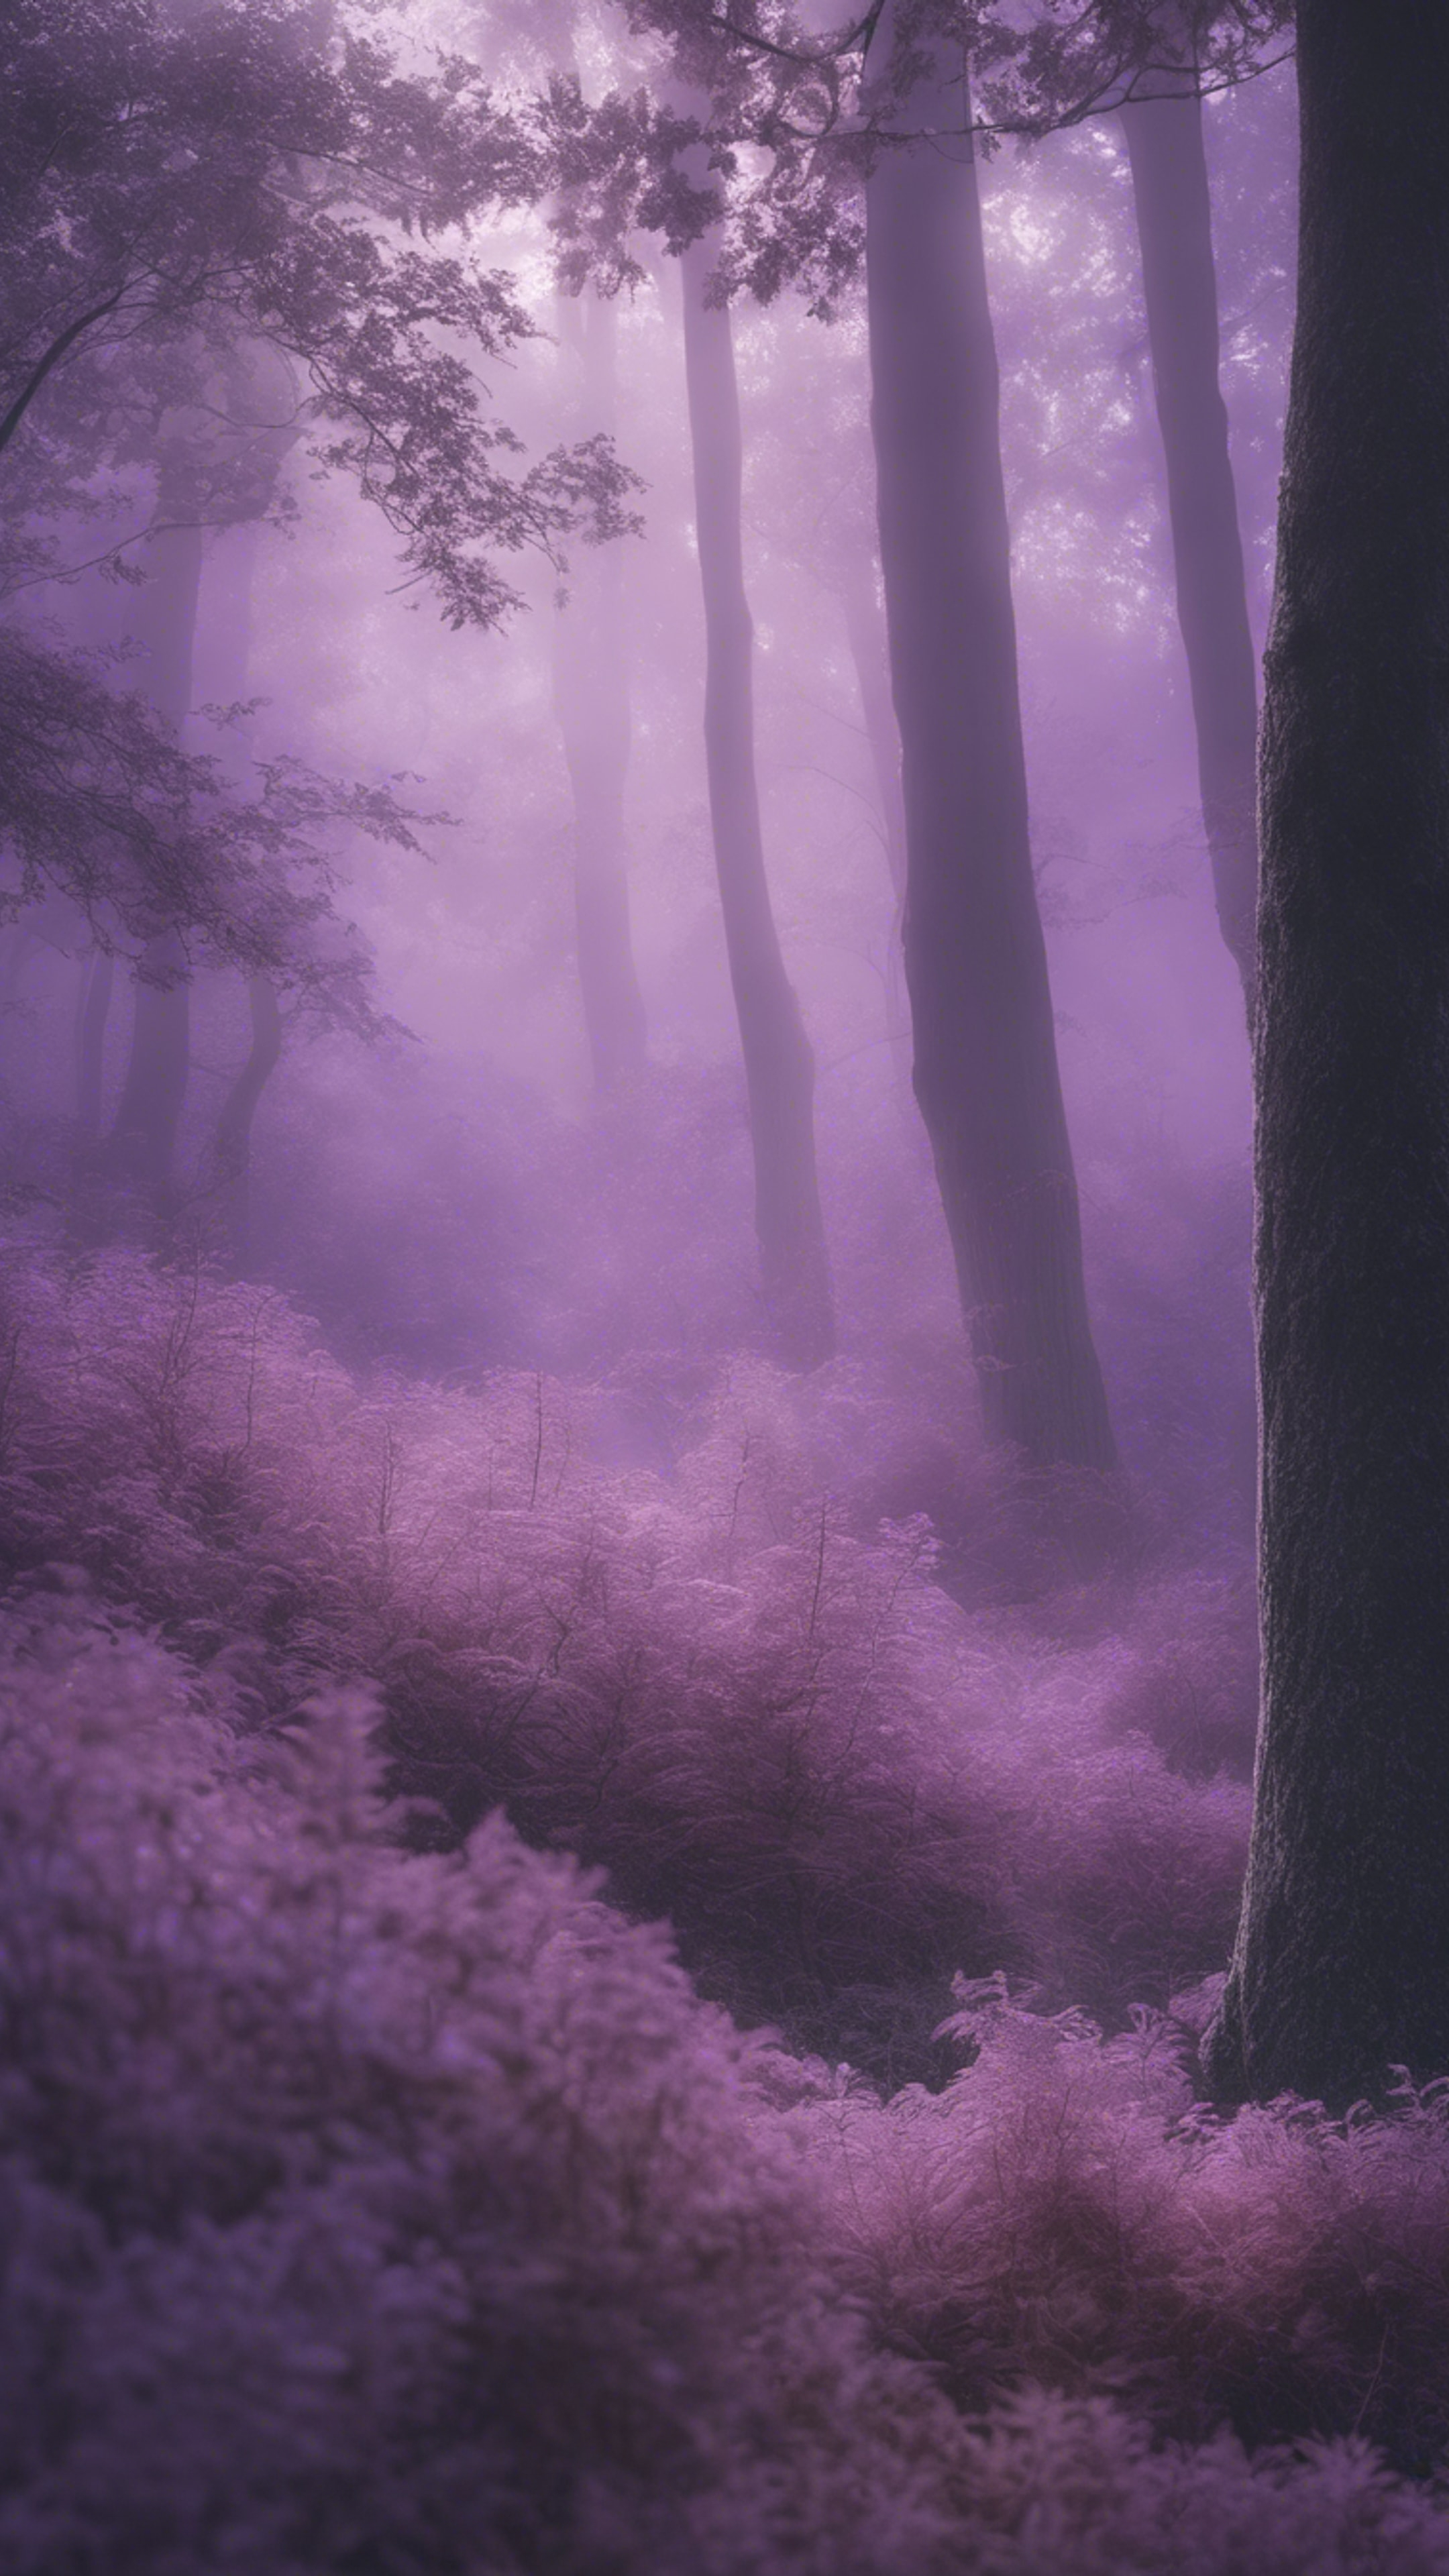 Ethereal scene of a tranquil forest bowed under a silky layer of light purple fog. Обои[581b7126aa2a4d368dd8]